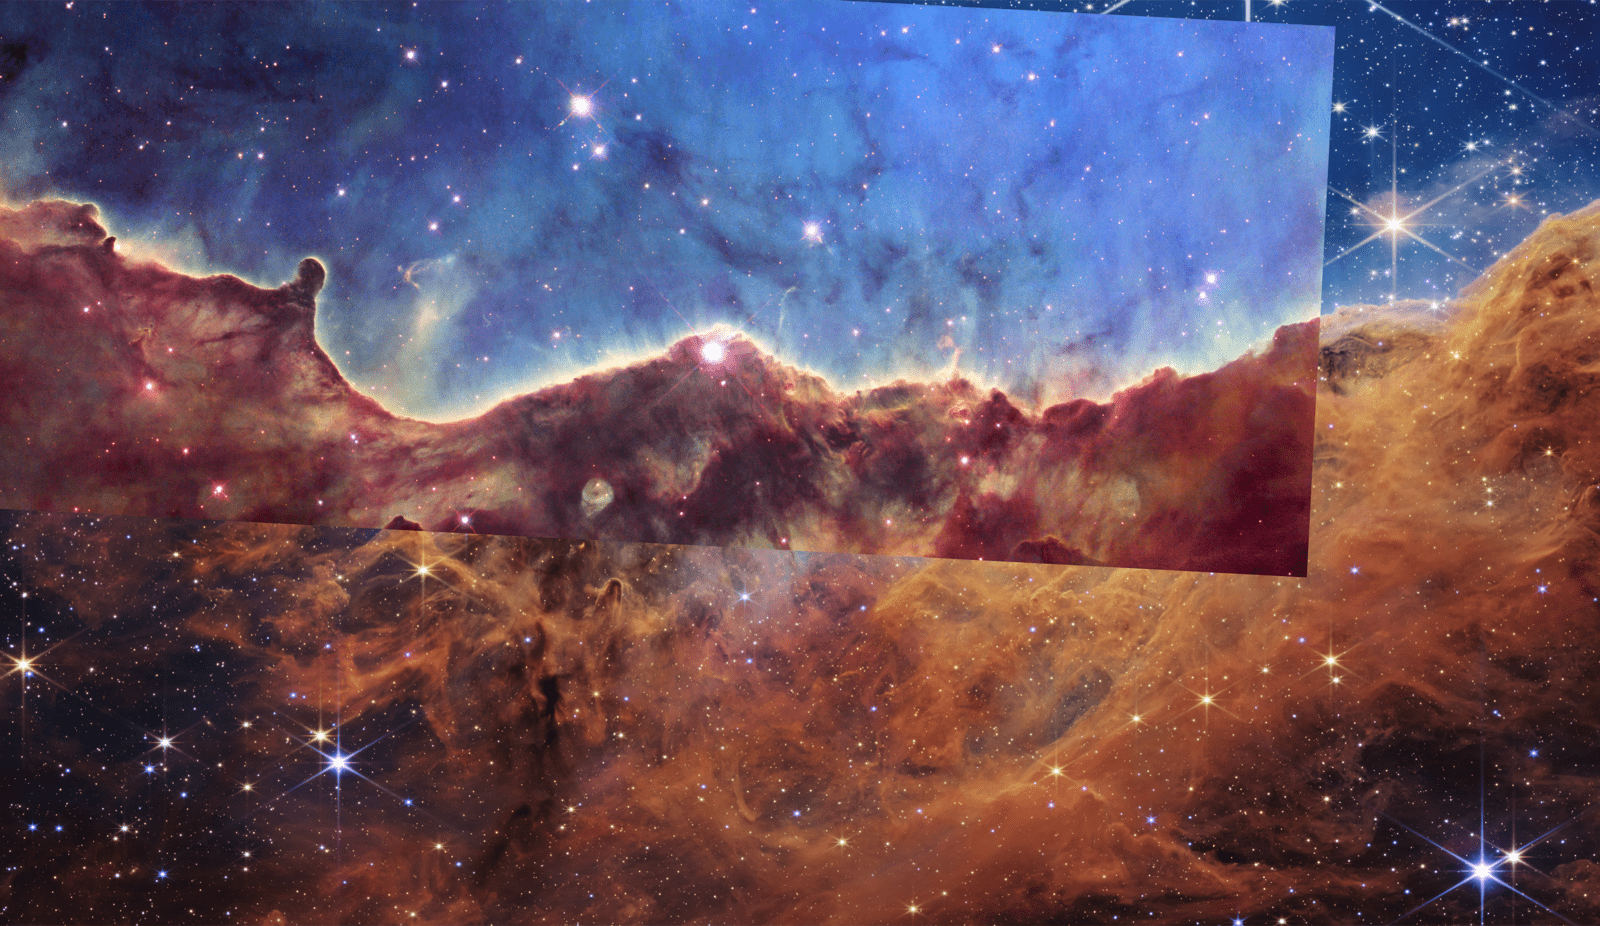 Two images of the same image laid on top of each other. The one on top, smaller than the one below it, is a Hubble image of the Carina Nebula shows the same region as a new Webb telescope image. Hills and valleys of gas and dust are displayed in intricate detail, cutting through a star-forming region. Wispy tendrils of gas, as well as dark trunks of dust, are set amid a backdrop of soft, glowing blue light. The glowing nebula has been carved out by intense ultraviolet radiation and stellar winds from several hot, young stars. The image also reveals dramatic dark towers of cool gas and dust that rise above the glowing wall of gas. The dense gas at the top resists the blistering ultraviolet radiation from the central stars, and creates a tower that points in the direction of the energy flow. the other from the jwst, is divided horizontally by an undulating line between a cloudscape forming a nebula along the bottom portion and a comparatively clear upper portion. Speckled across both portions is a starfield, showing innumerable stars of many sizes. The smallest of these are small, distant, and faint points of light. The largest of these appear larger, closer, brighter, and more fully resolved with 8-point diffraction spikes. The upper portion of the image is blueish, and has wispy translucent cloud-like streaks rising from the nebula below. The orangish cloudy formation in the bottom half varies in density and ranges from translucent to opaque. The stars vary in color, the majority of which, have a blue or orange hue. The cloud-like structure of the nebula contains ridges, peaks, and valleys – an appearance very similar to a mountain range. Three long diffraction spikes from the top right edge of the image suggest the presence of a large star just out of view.